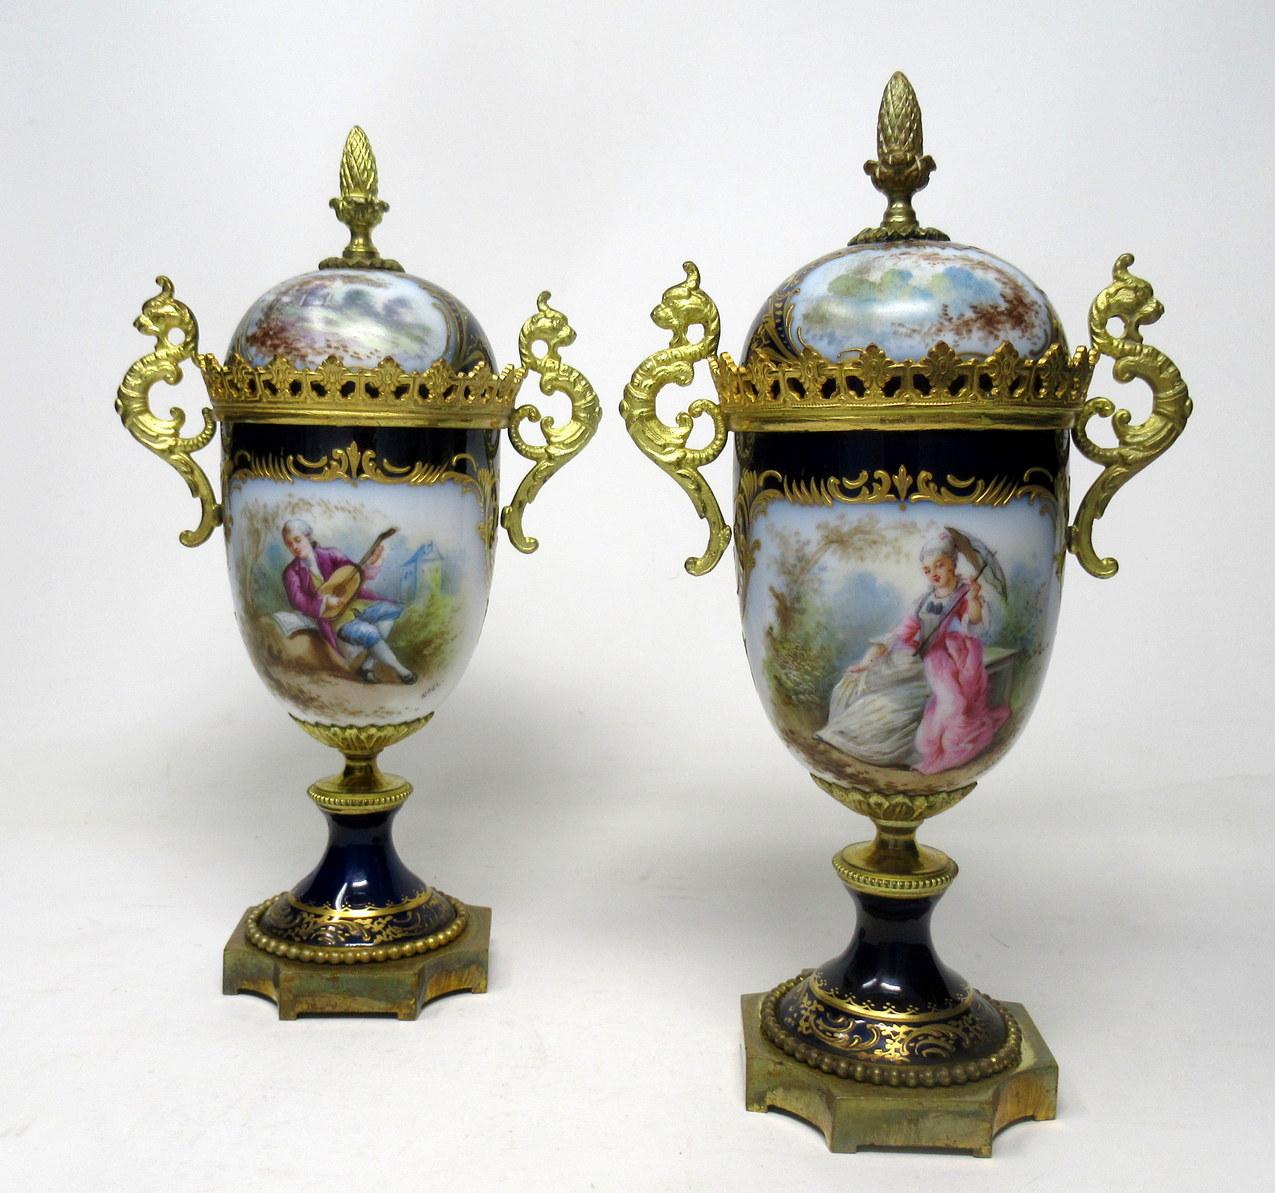 Stunning pair of French Sèvres style soft paste porcelain and ormolu twin handle table or mantel (fireplace) urns of traditional form, of outstanding quality, and medium size proportions, each raised on a square stepped base with beaded detailing